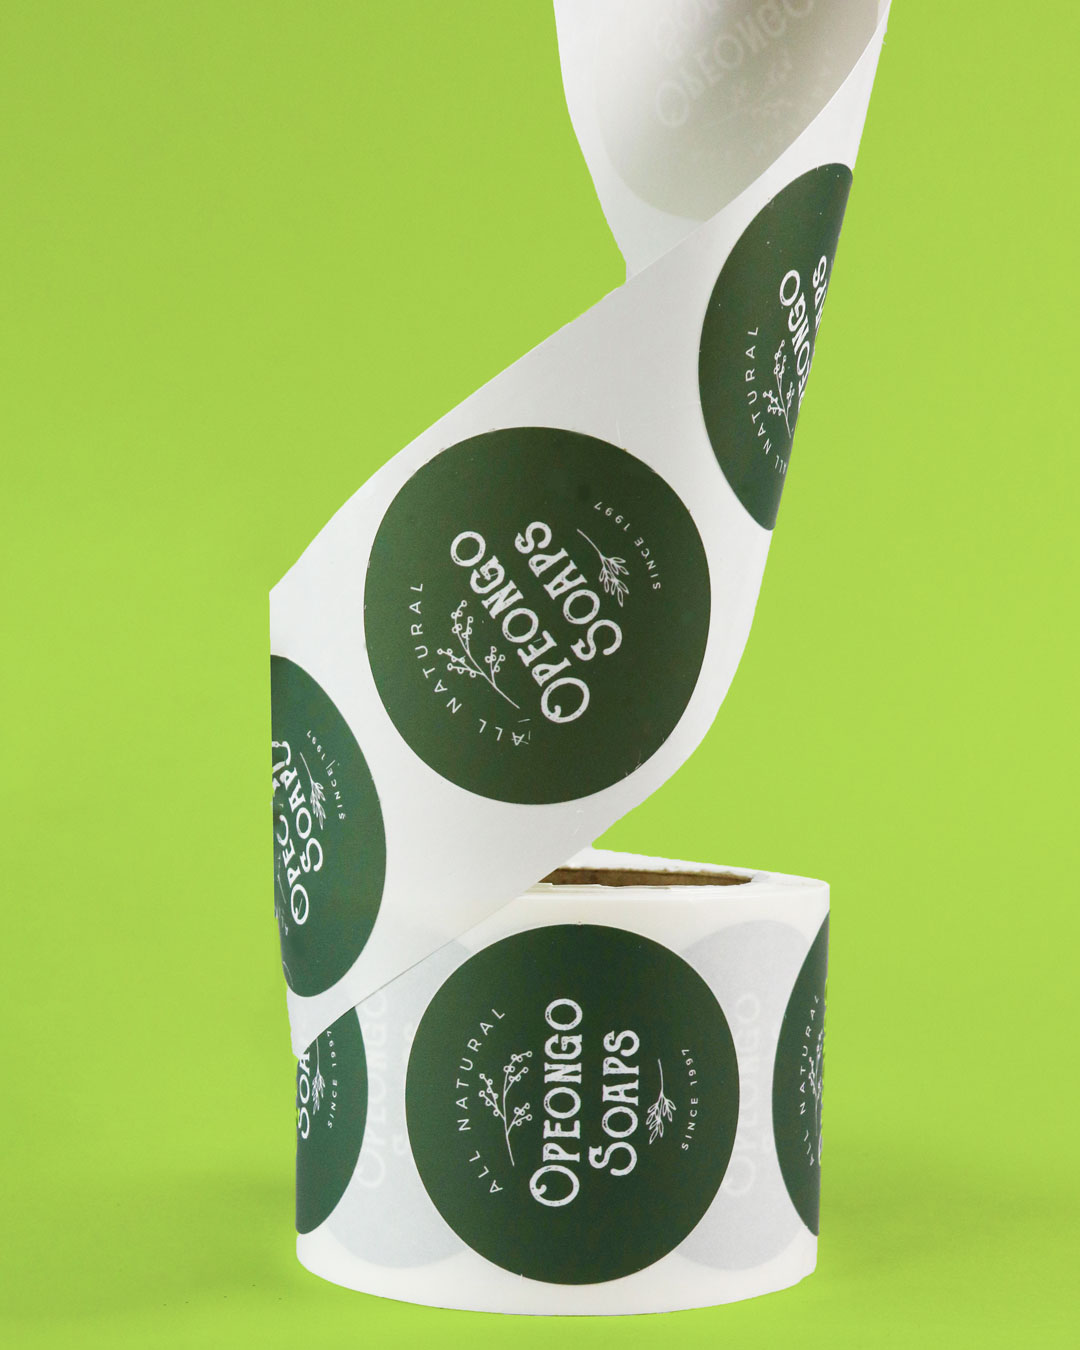 An image of custom circle labels featuring the Opeongo Soaps logo.